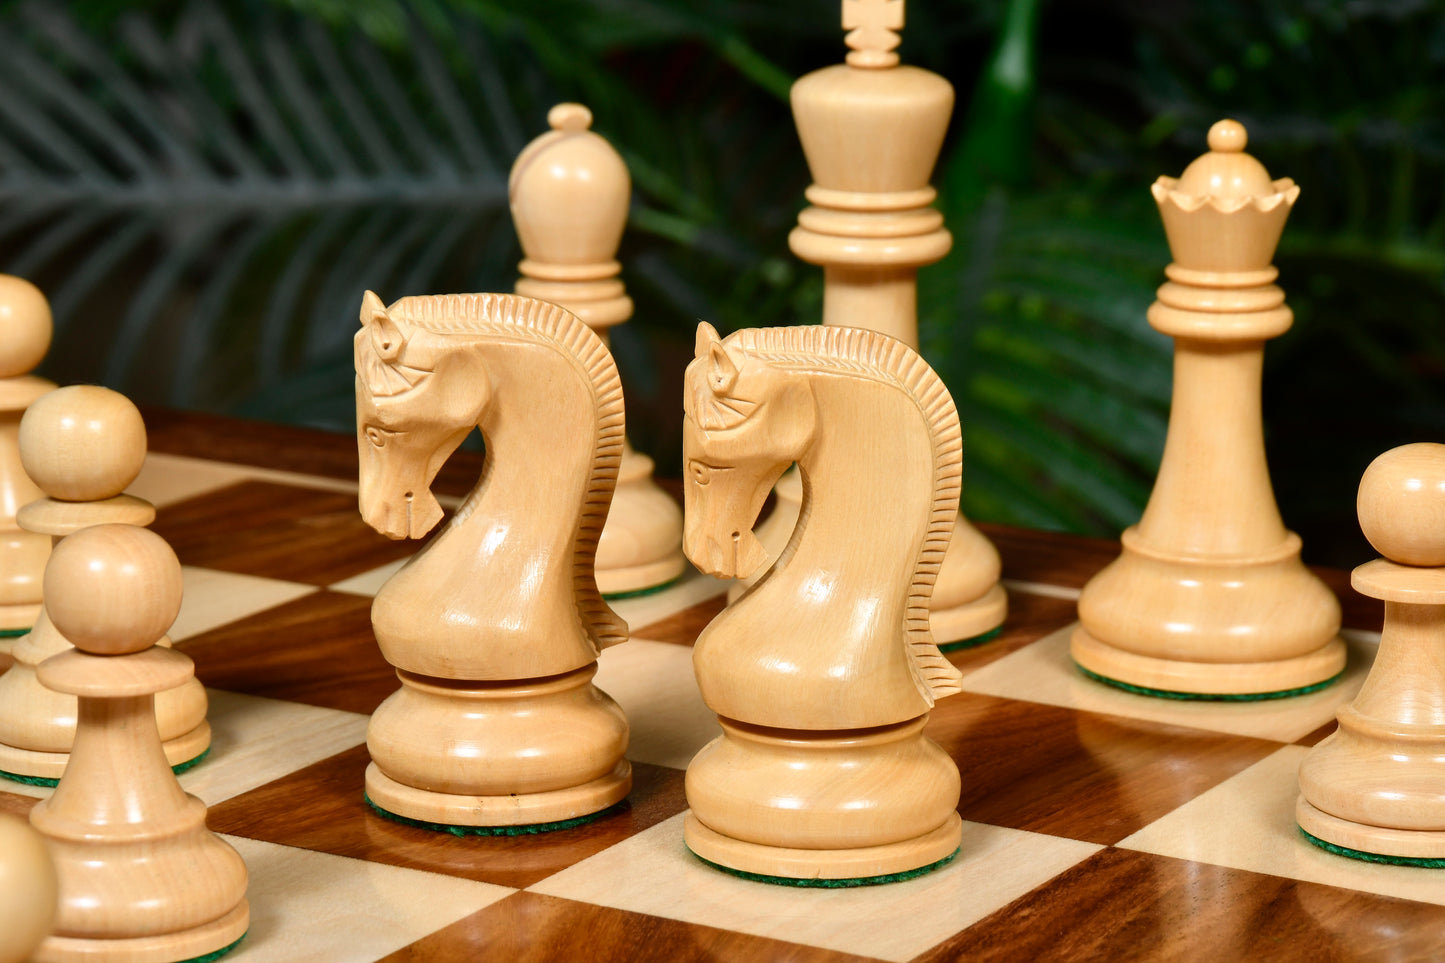 The Leningrad Club-Sized Wooden Chess Pieces in Sheesham Wood (Golden Rosewood) & Boxwood- 4.0" King